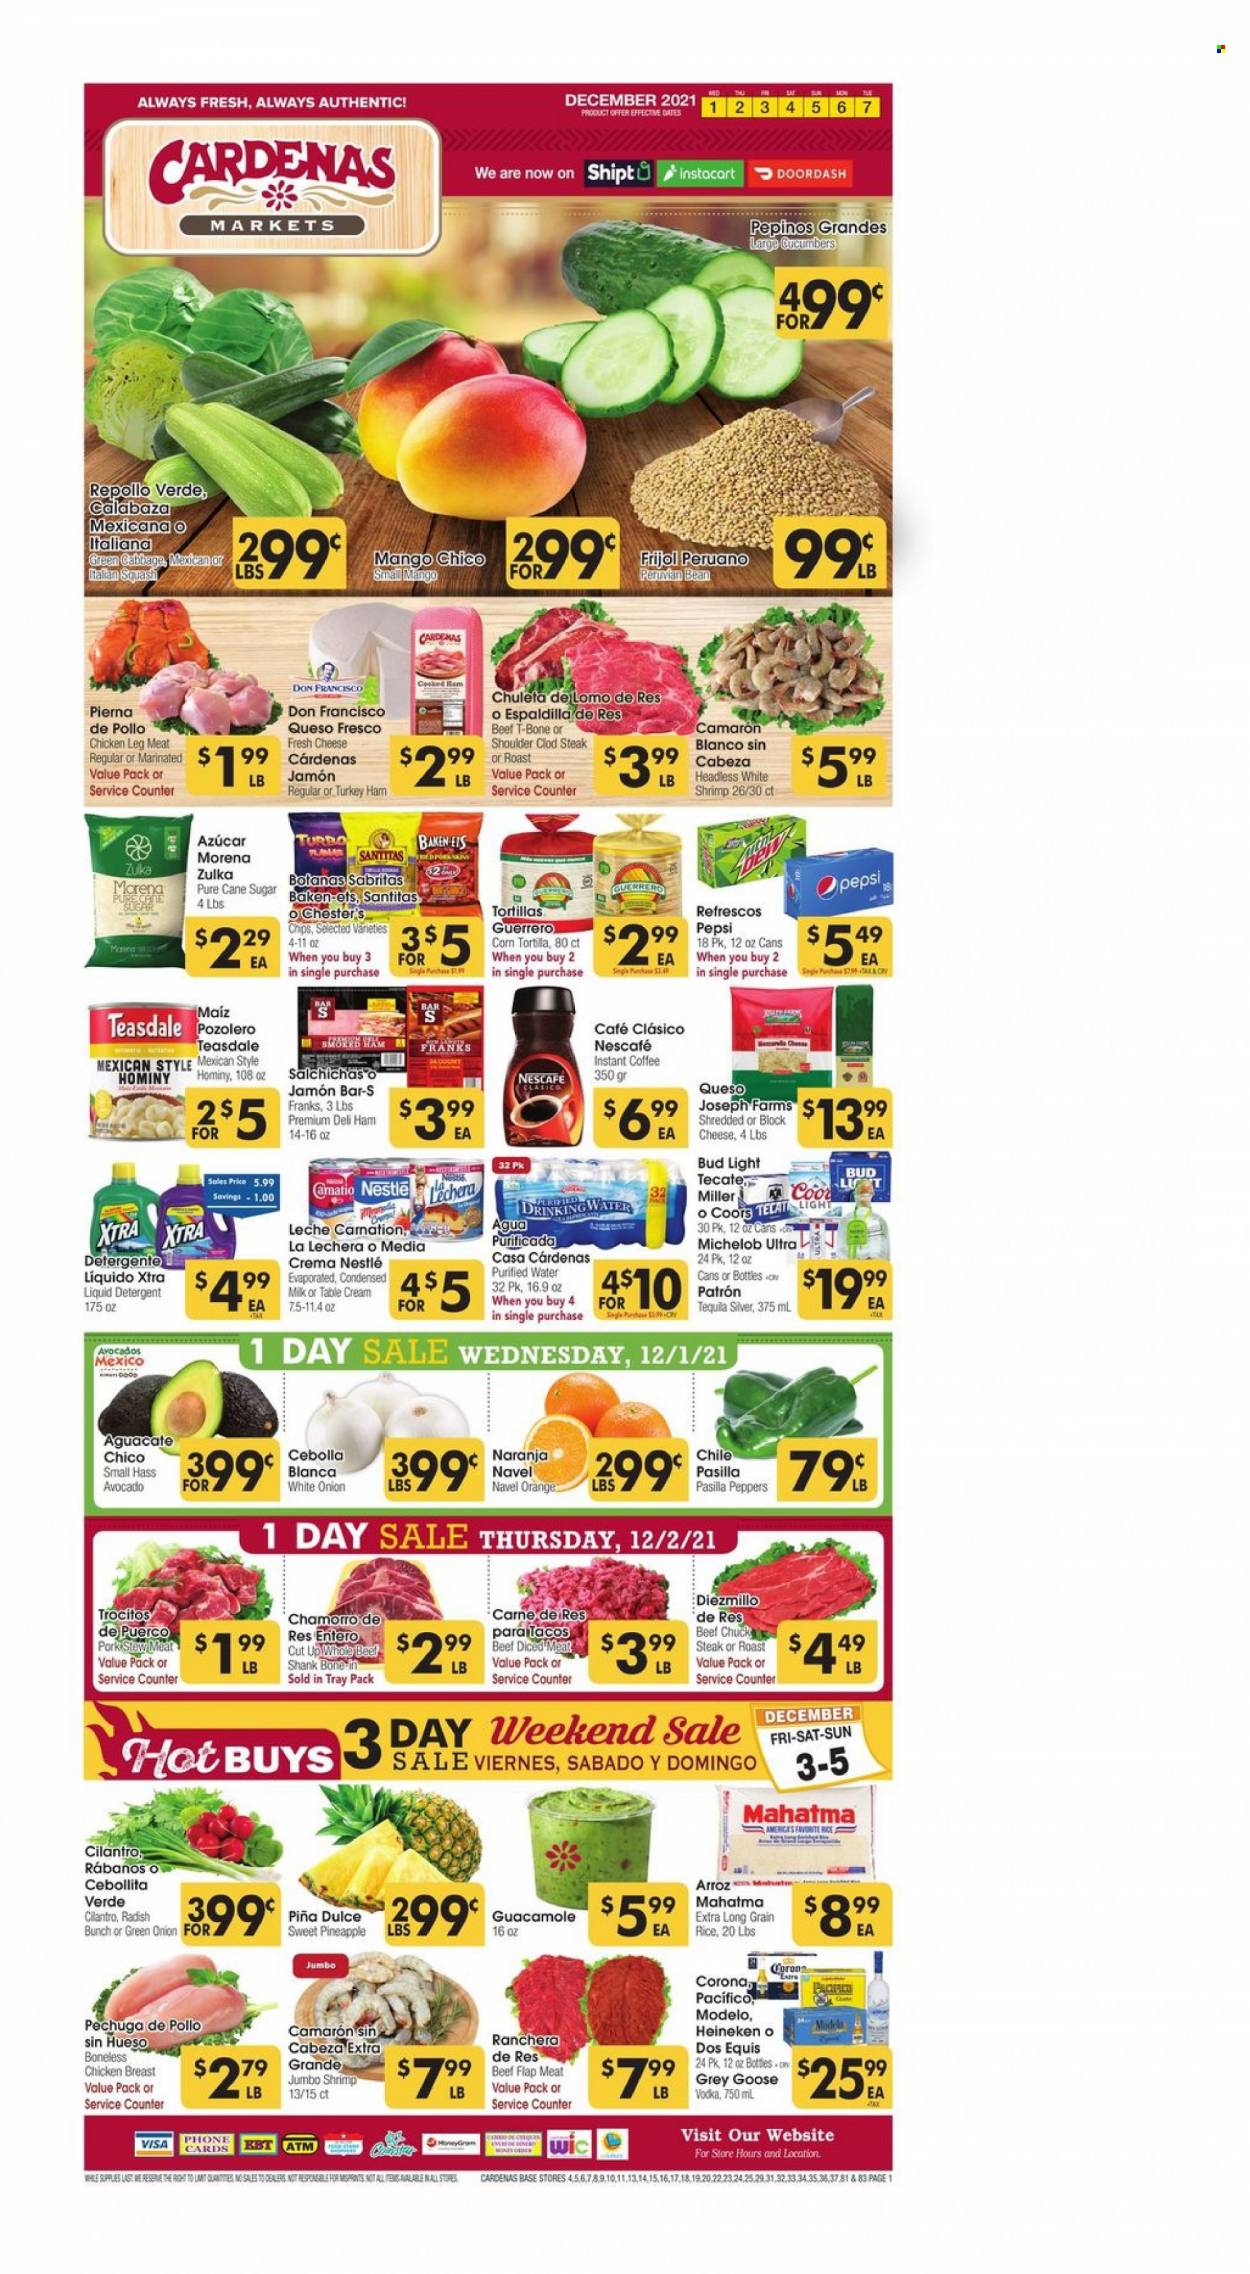 thumbnail - Cardenas Flyer - 12/01/2021 - 12/07/2021 - Sales products - stew meat, tortillas, cucumber, radishes, peppers, green onion, mango, pineapple, oranges, shrimps, ham, guacamole, queso fresco, cheese, Nestlé, chips, cane sugar, sugar, long grain rice, cilantro, Pepsi, purified water, instant coffee, Nescafé, tequila, vodka, beer, Bud Light, Corona Extra, Heineken, Miller, Modelo, chicken breasts, chicken legs, beef meat, t-bone steak, steak, chuck steak, detergent, liquid detergent, XTRA, Coors, Dos Equis, Michelob, pasilla, navel oranges. Page 1.